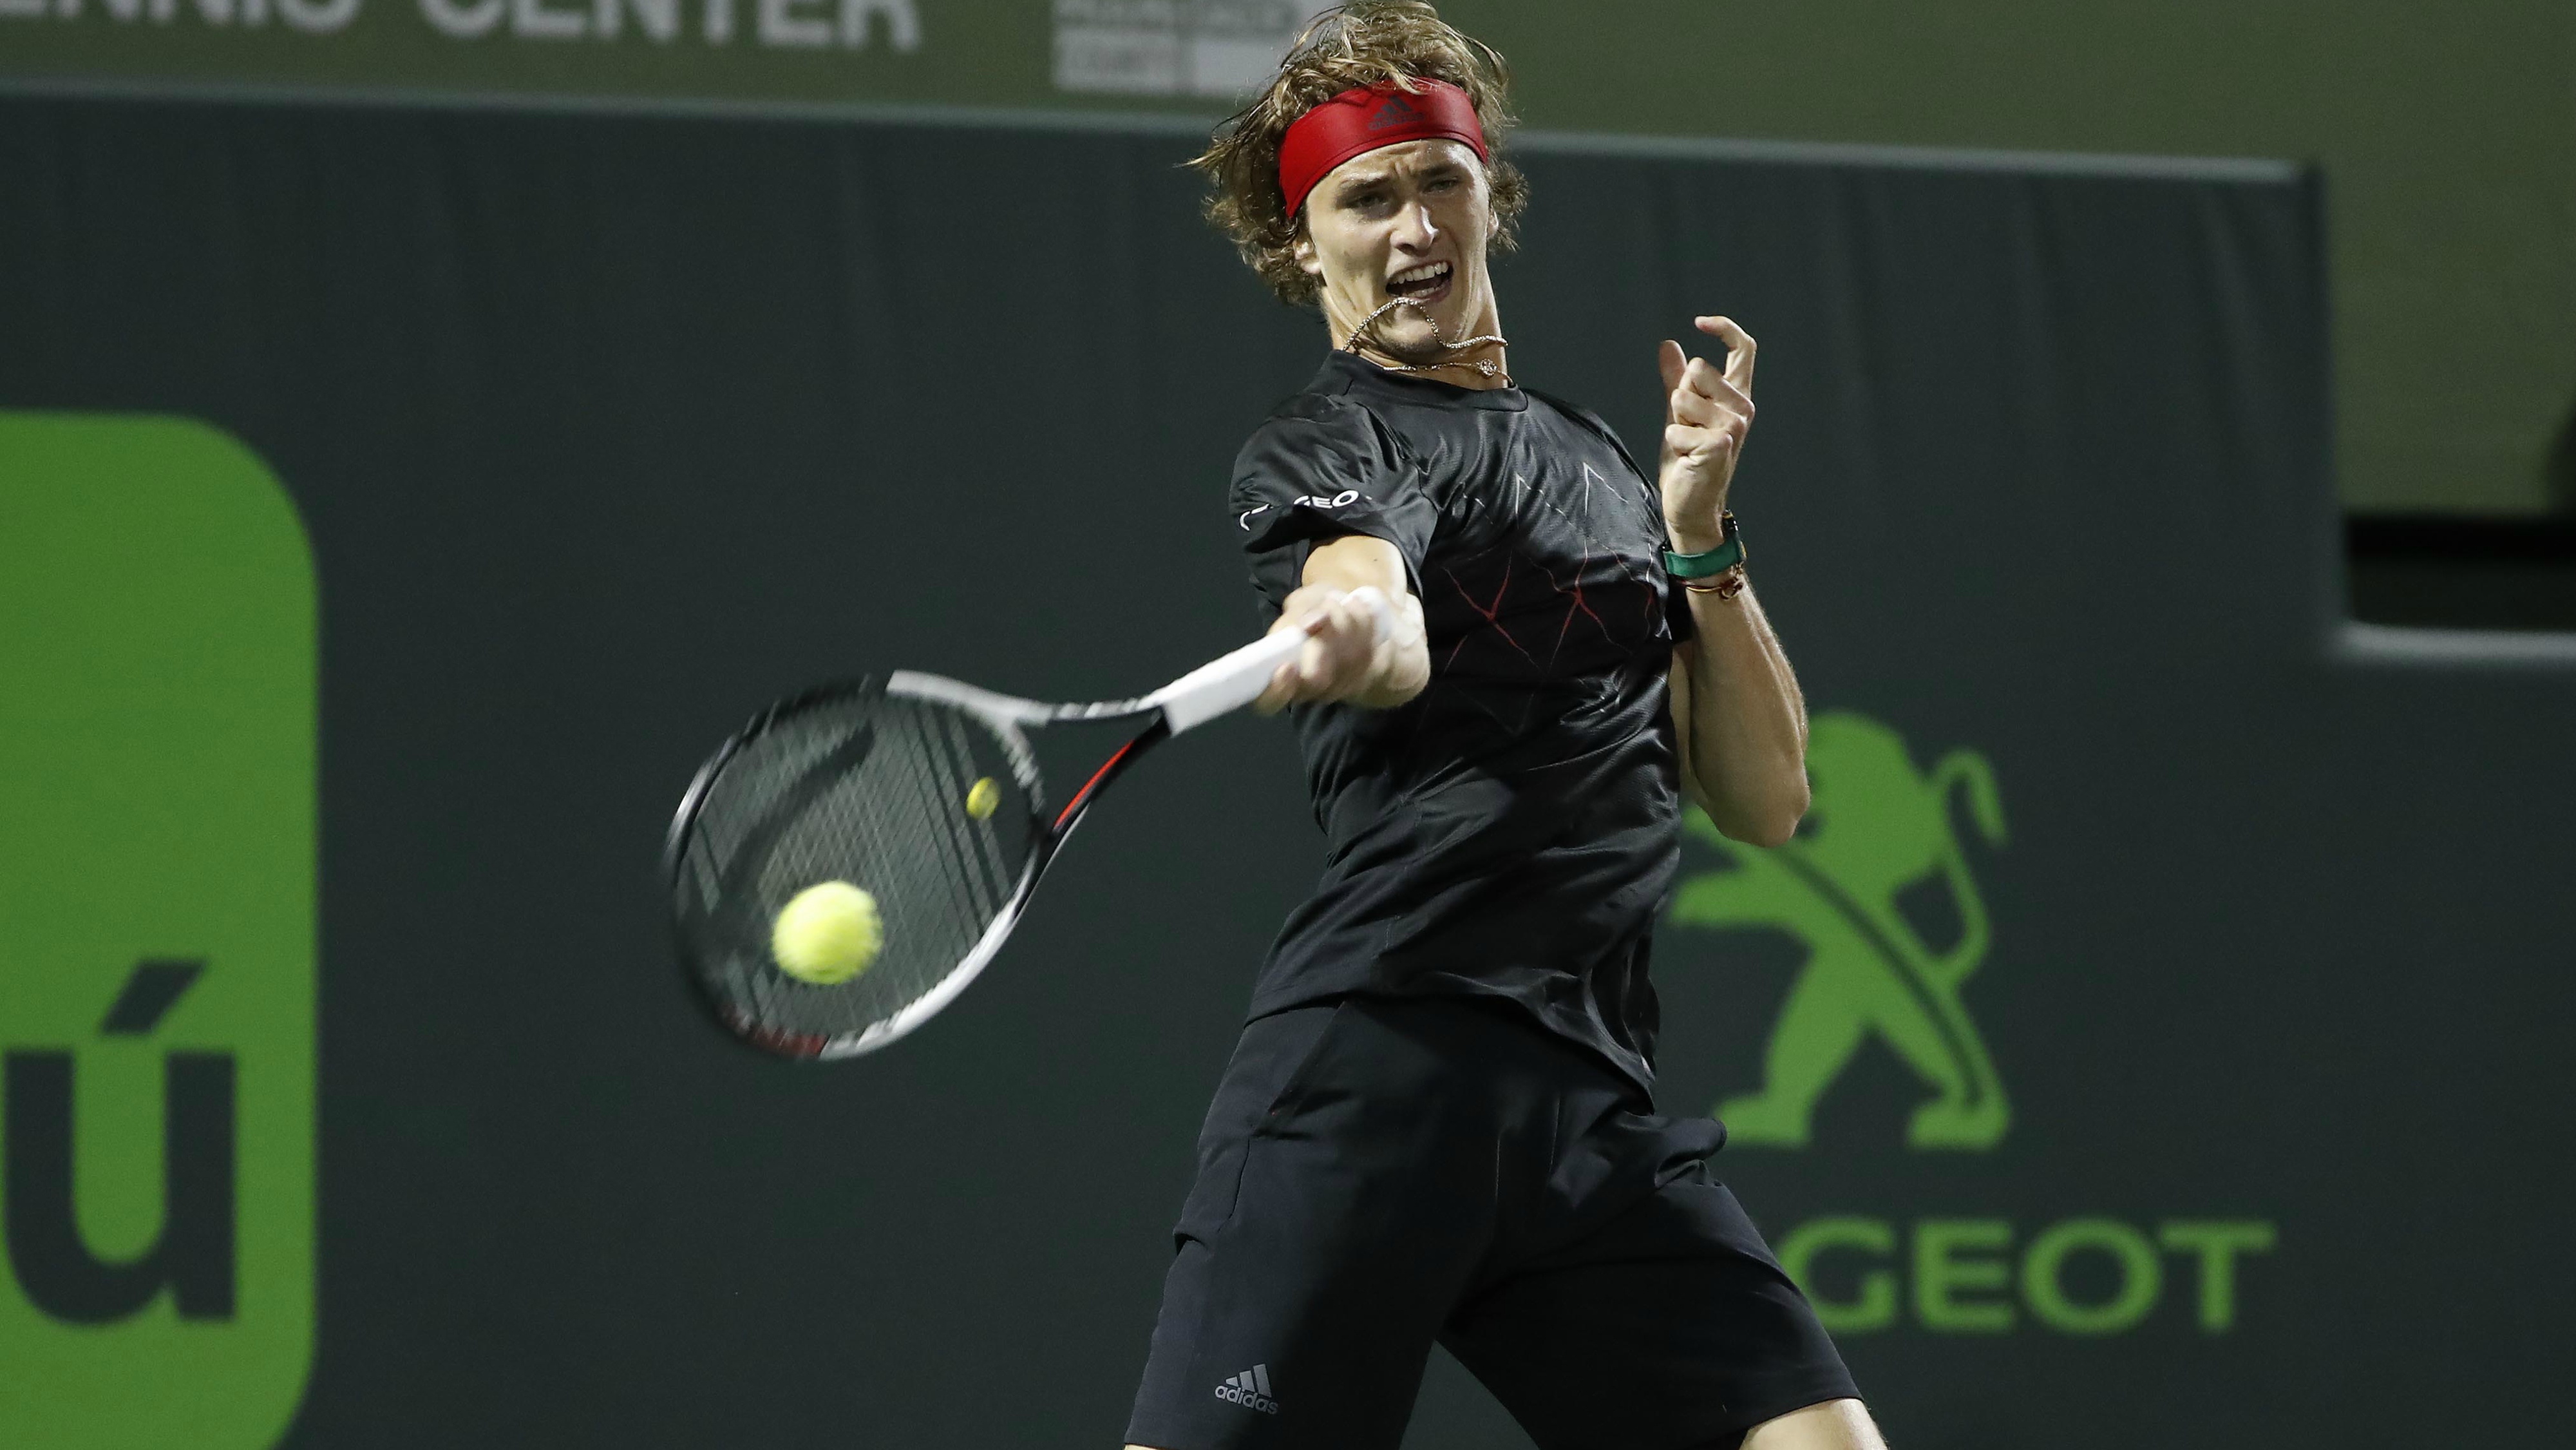 Miami Open: Alexander Zverev sets up fourth round clash with Nick Kyrgios